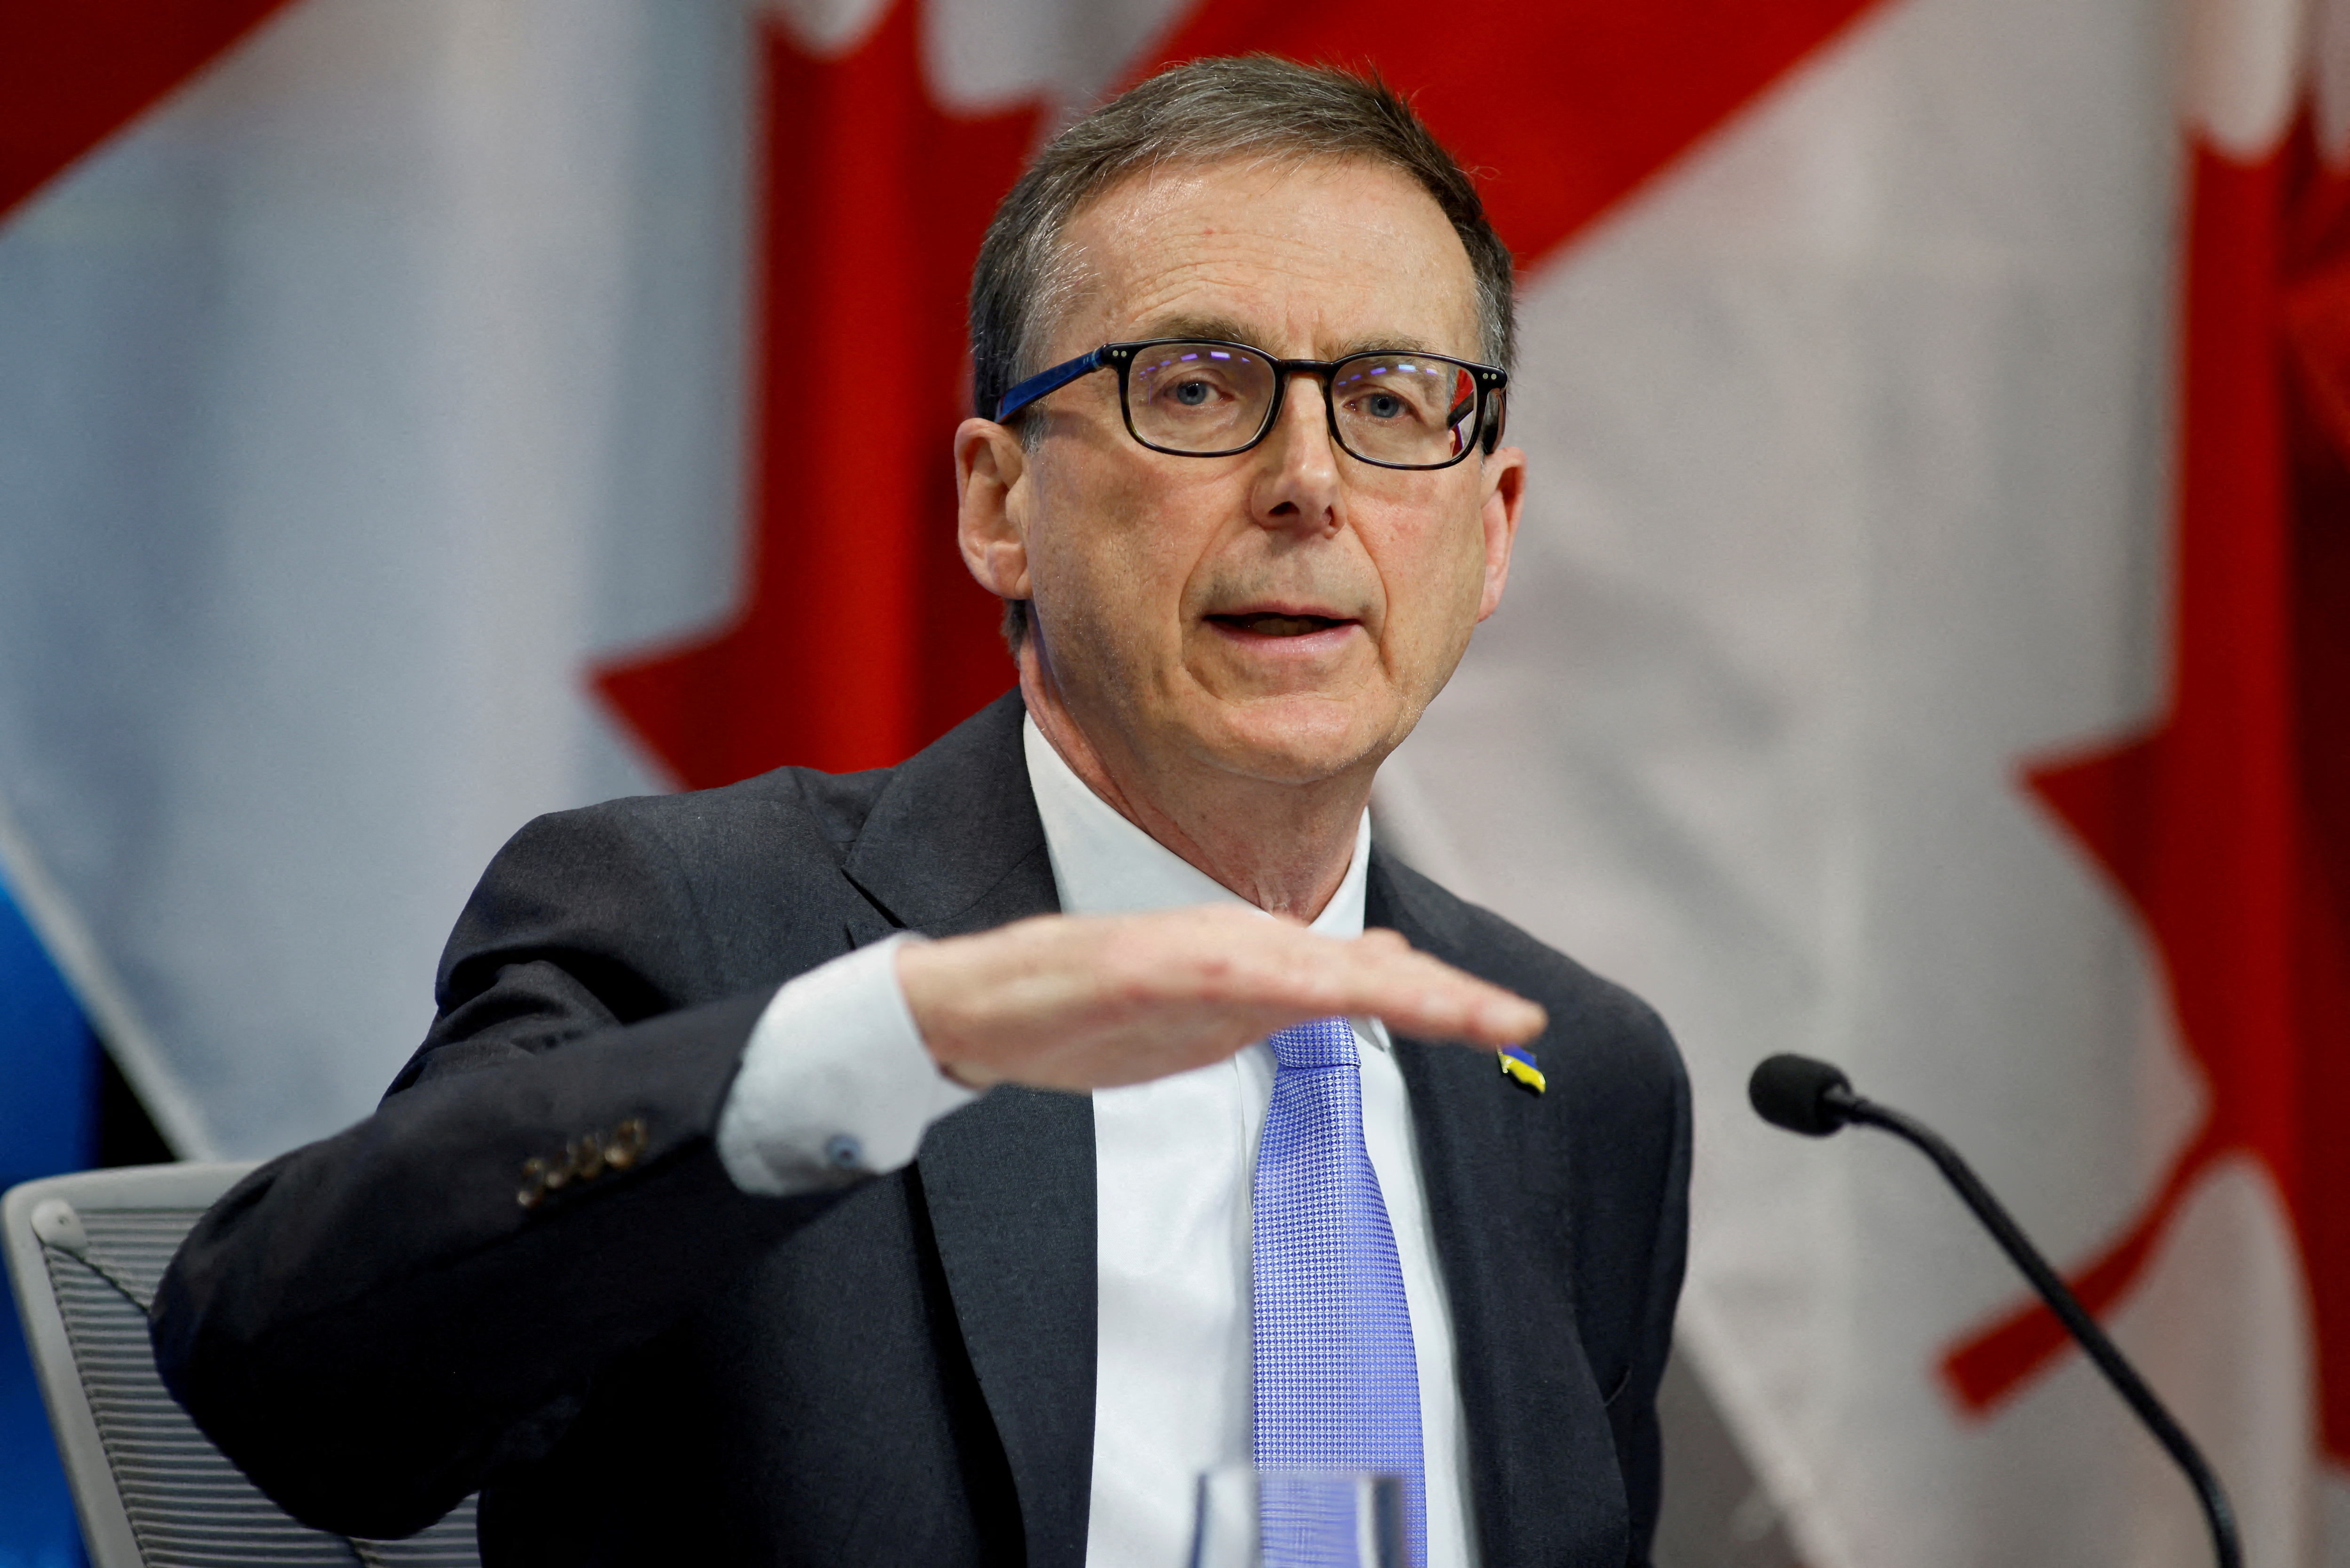 Bank of Canada Governor Tiff Macklem takes part in a news conference in Ottawa